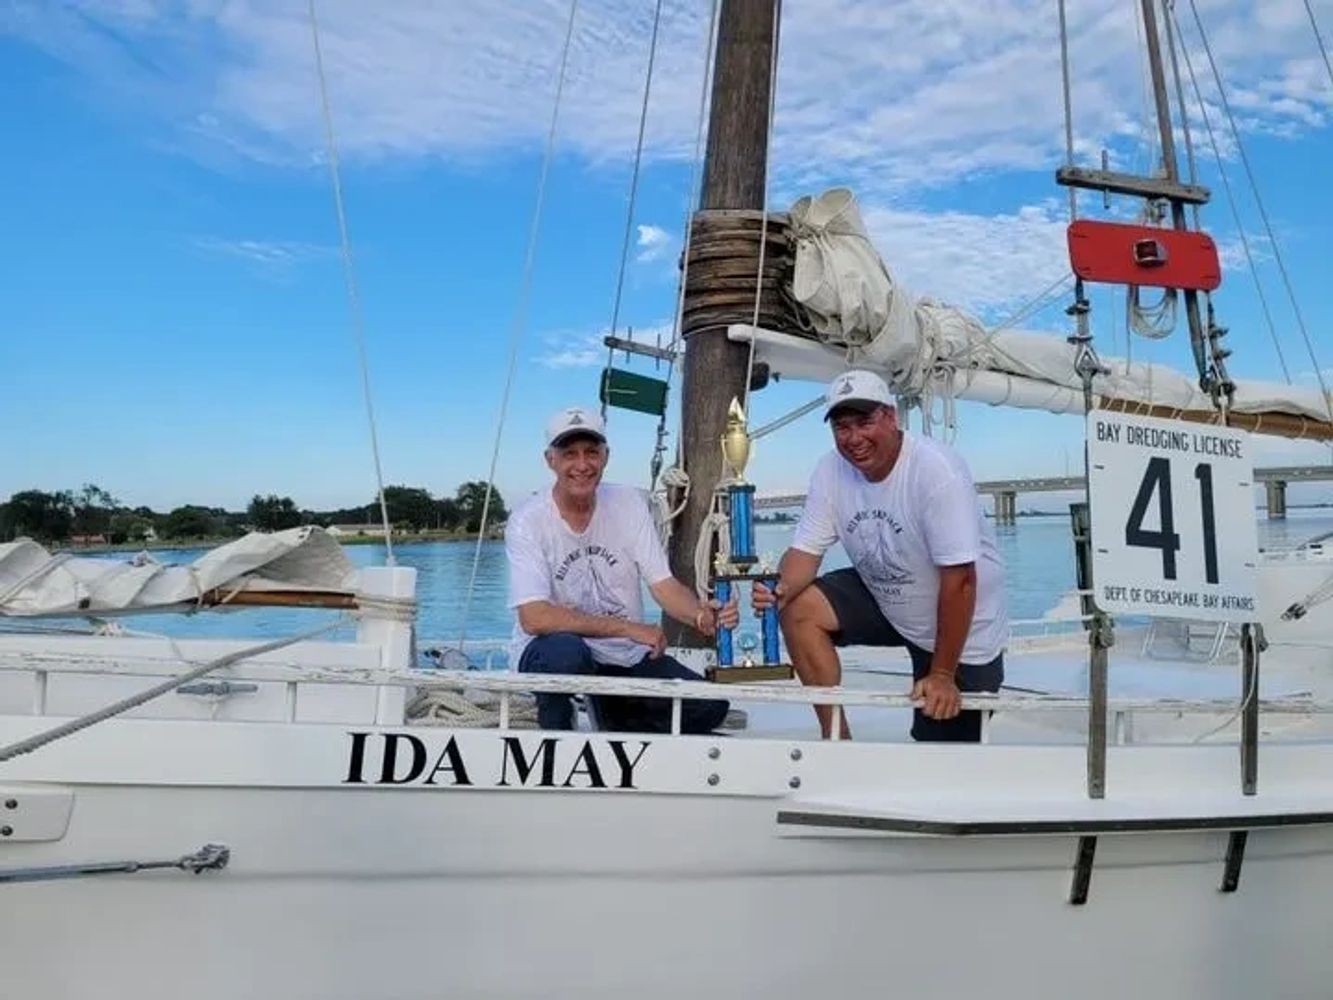 Winner of the 64th Annual Skipjack Race at Deal Island the Ida May with Capt. Shawn Ridgely & Mate K